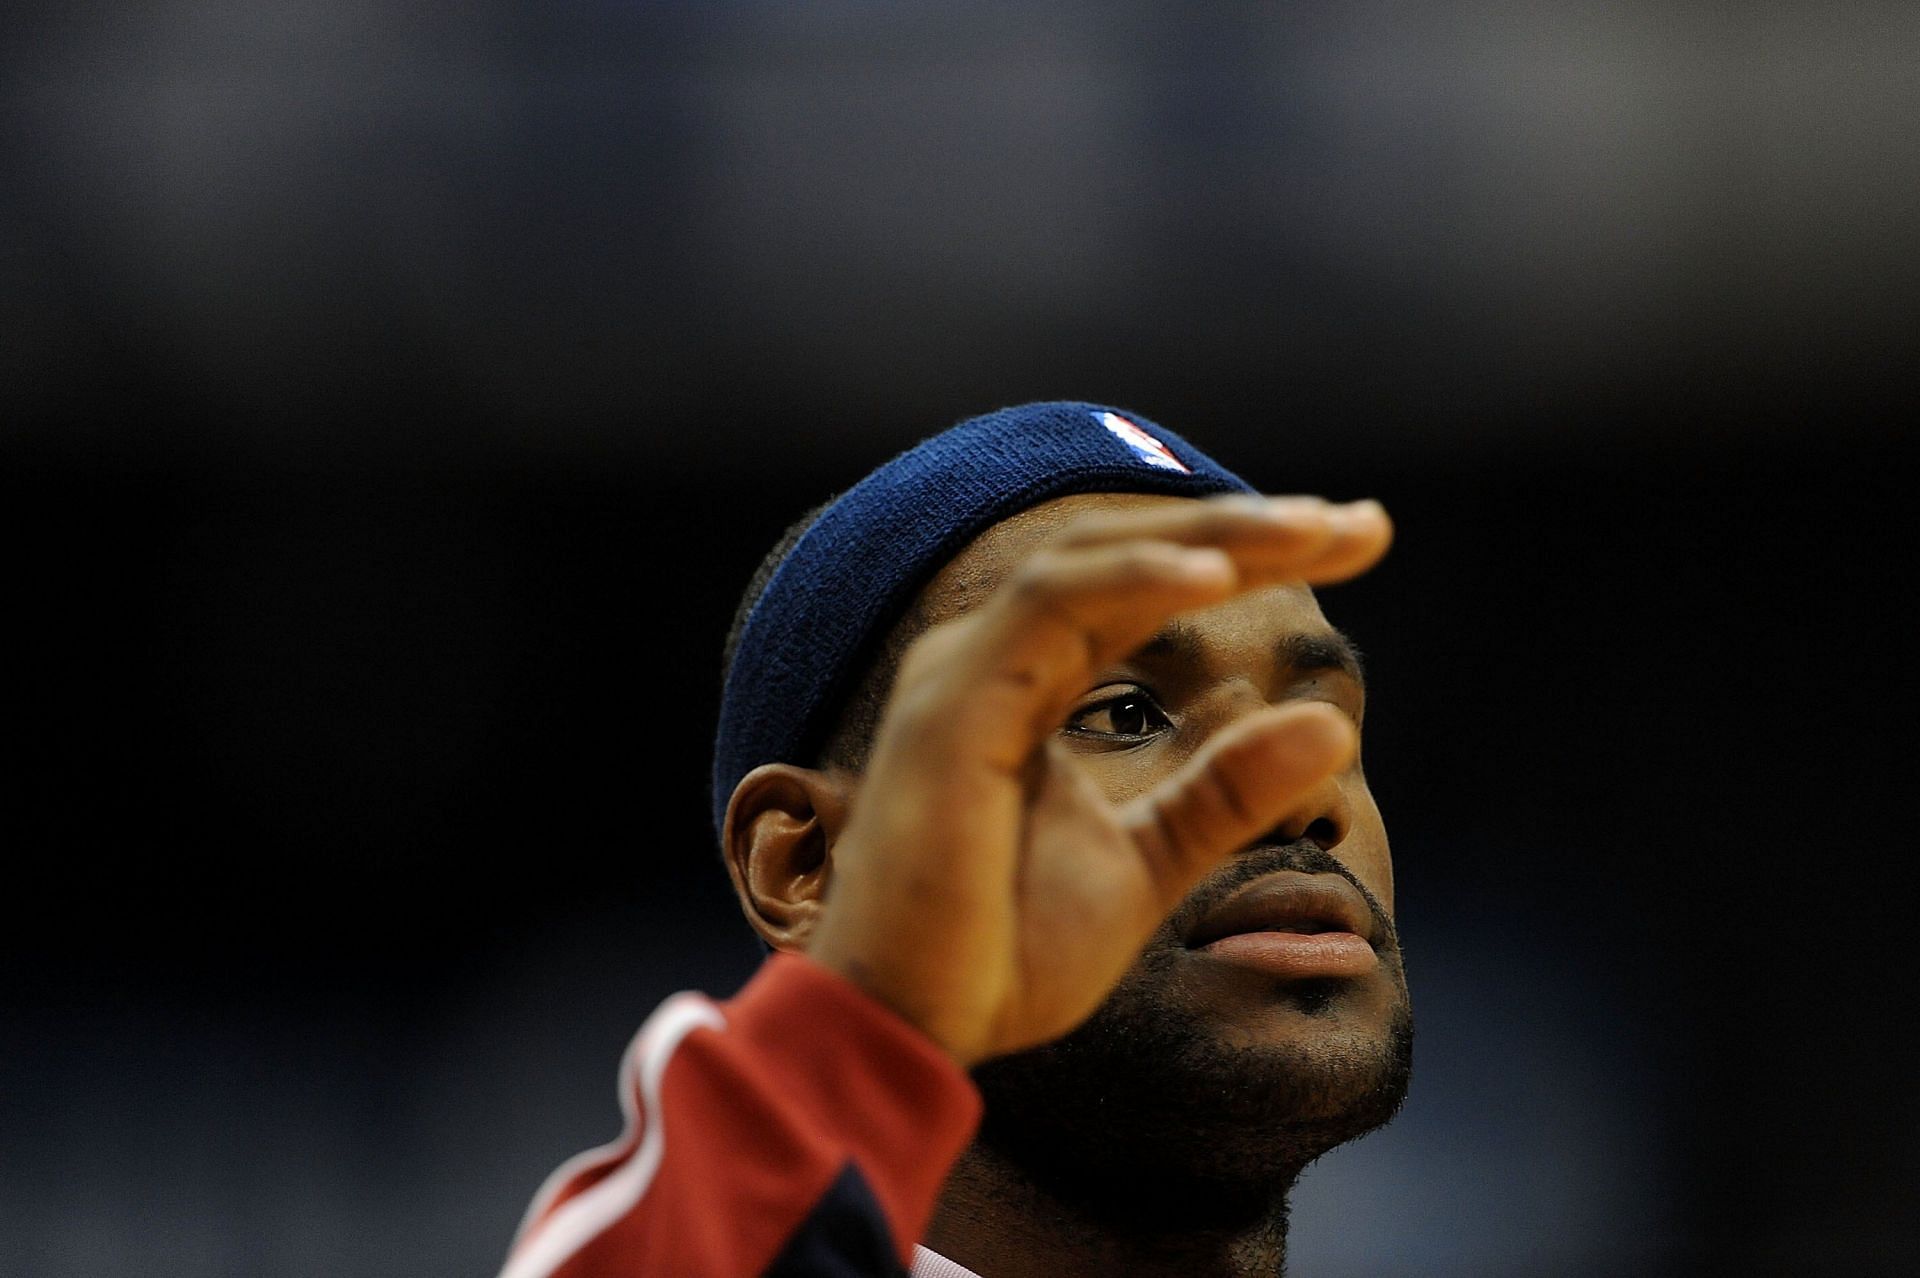 Forward LeBron James of the Cleveland Cavaliers warms up for a game against the Dallas Mavericks on November 3, 2008, at American Airlines Center in Dallas.